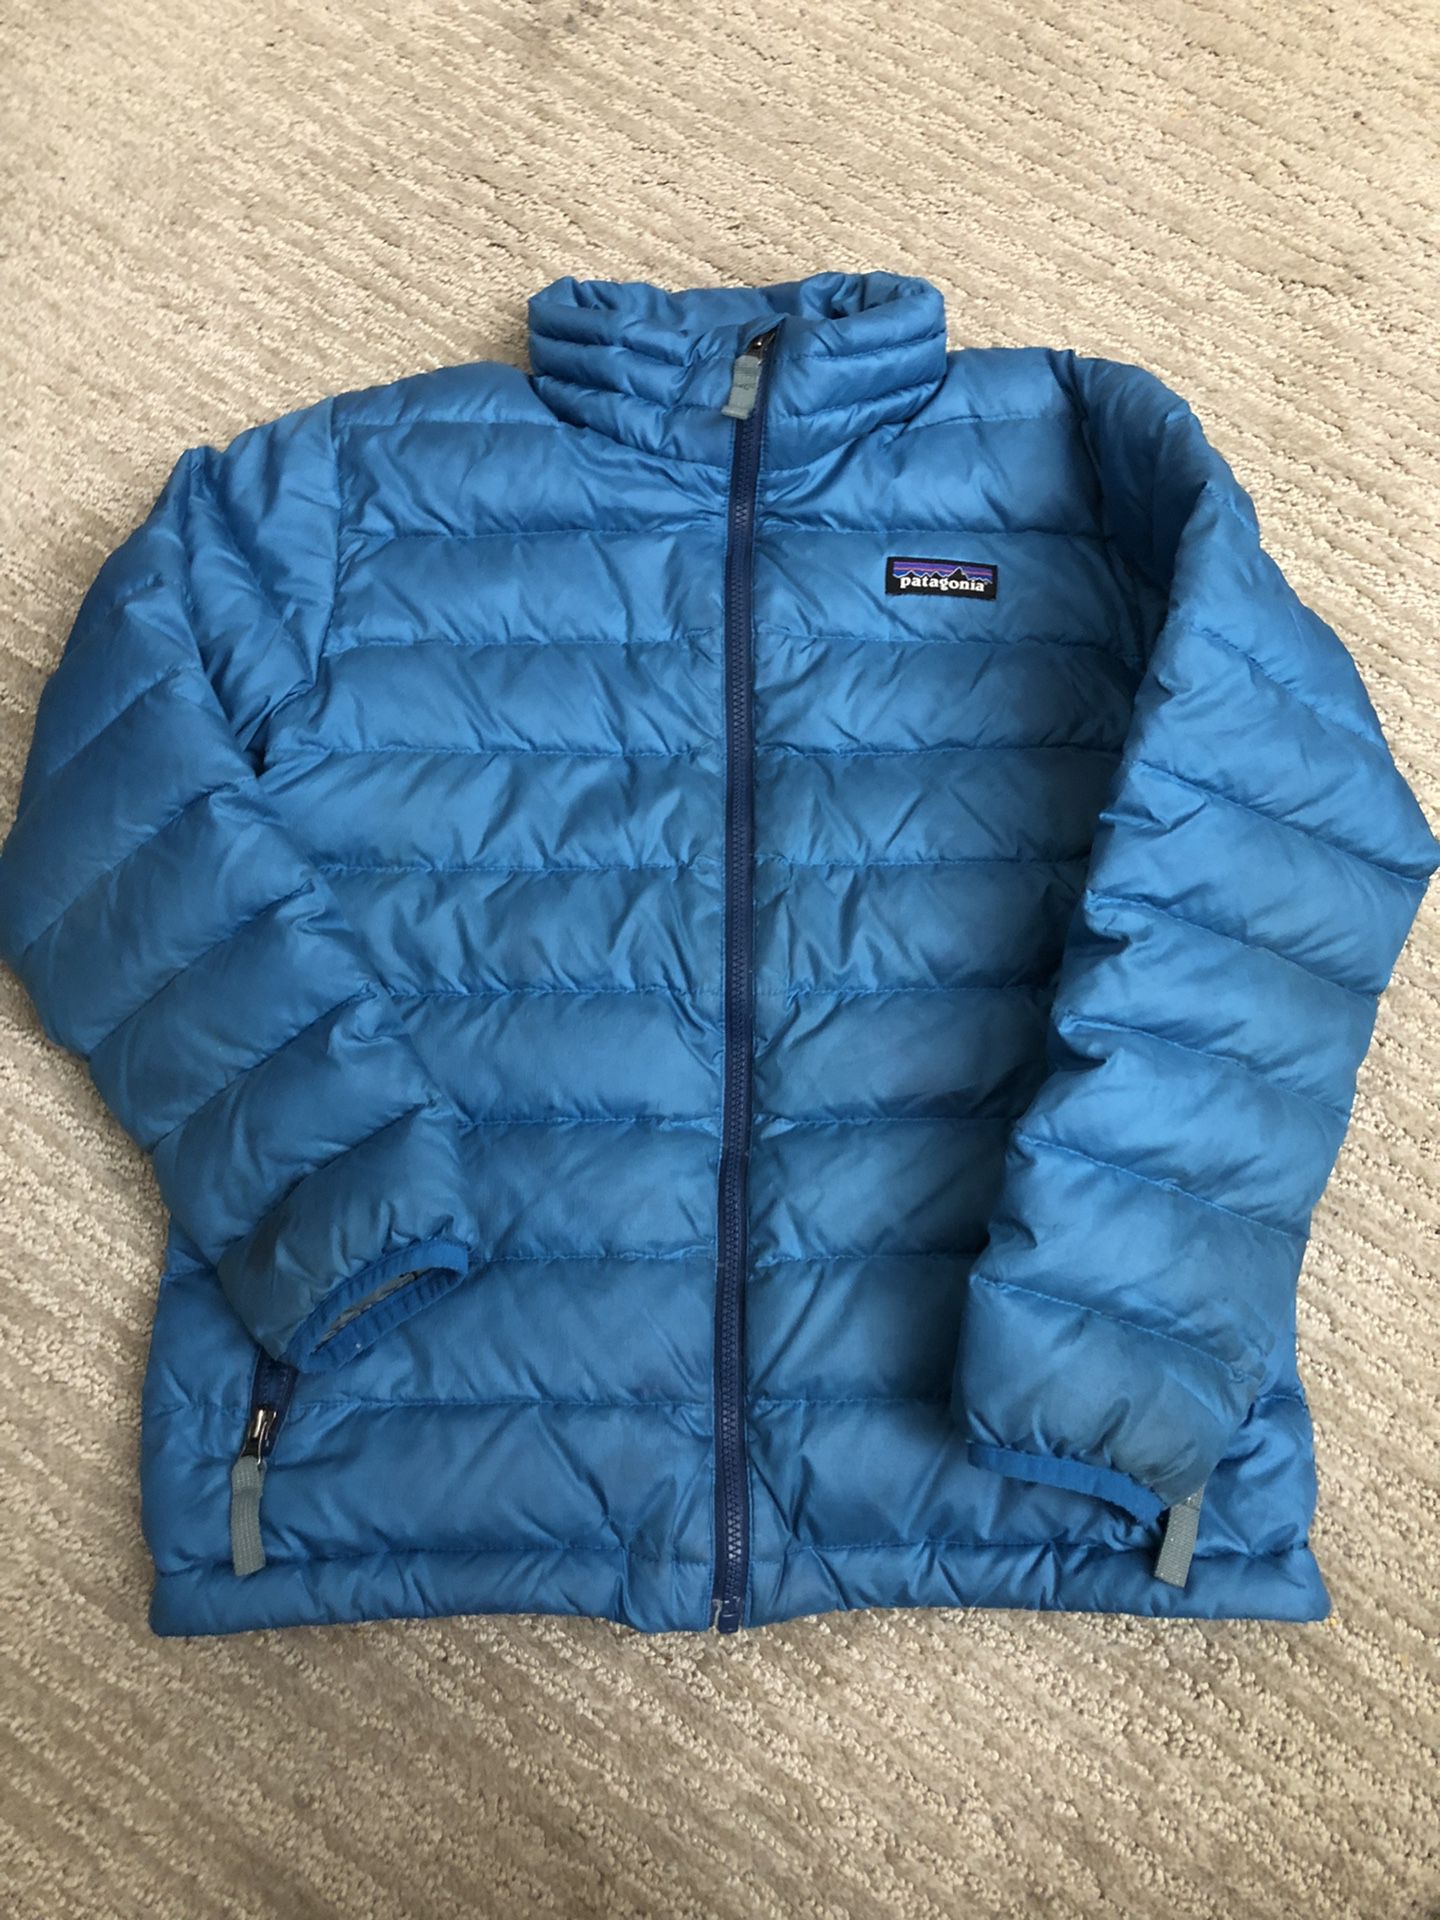 Patagonia Down Sweater Youth Small